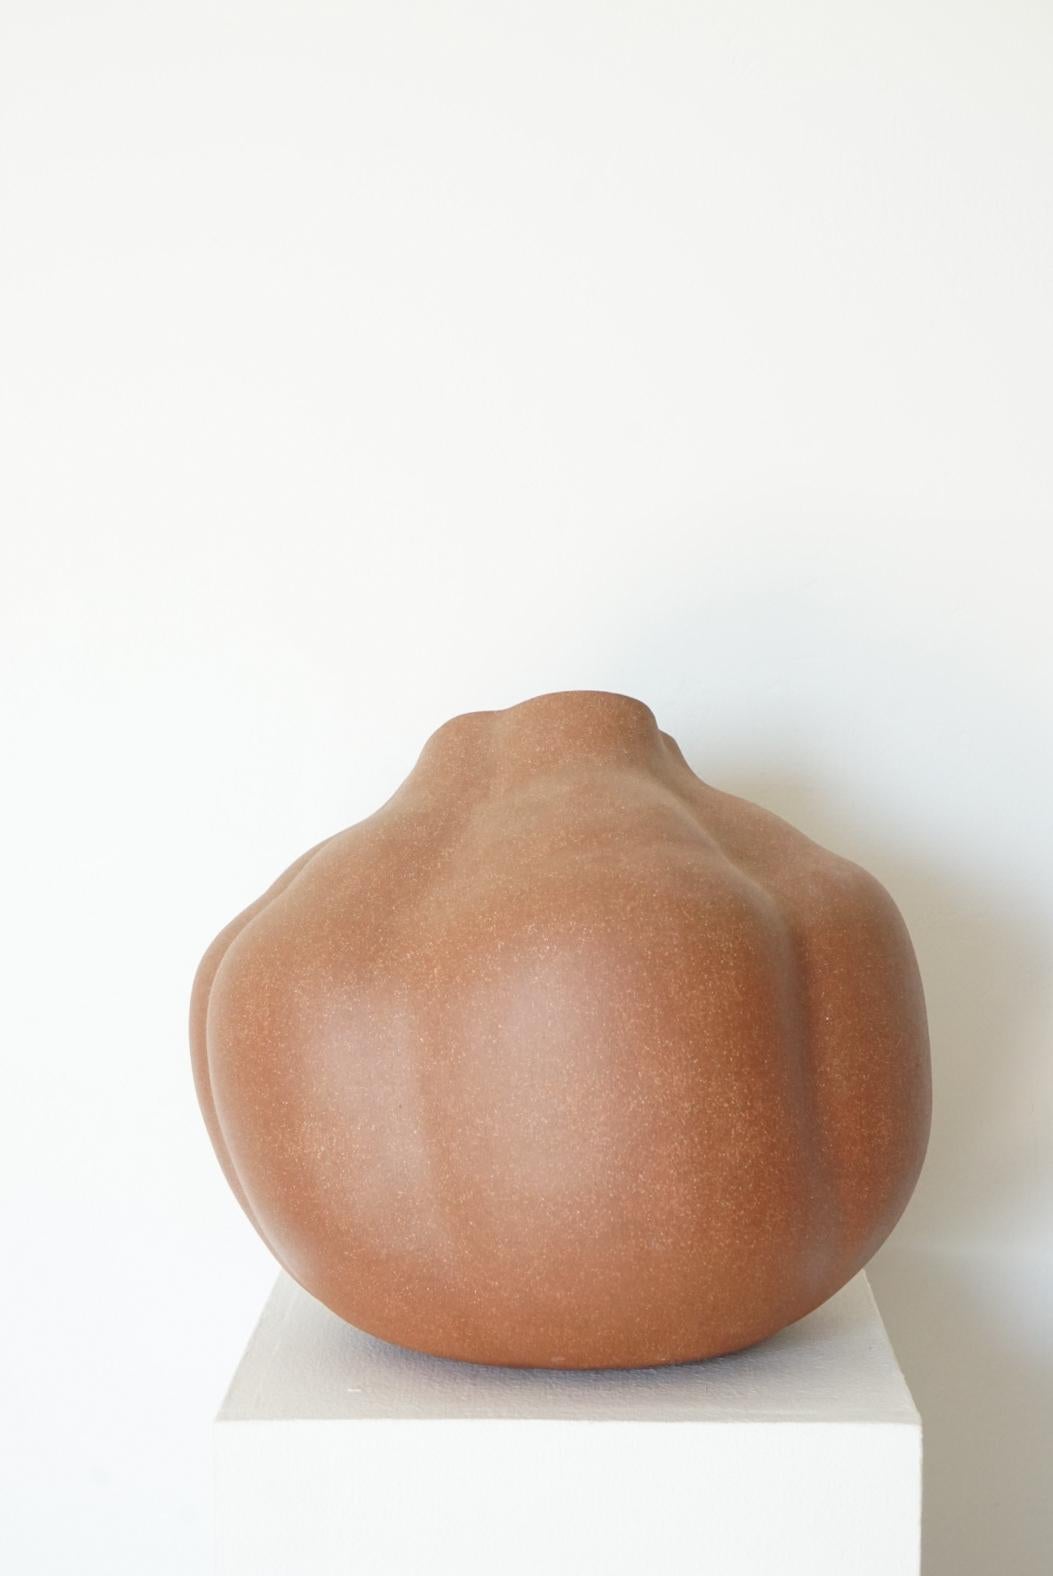 Large Organic Sculptural Ceramic Pottery Vessel  In Good Condition For Sale In San Diego, CA